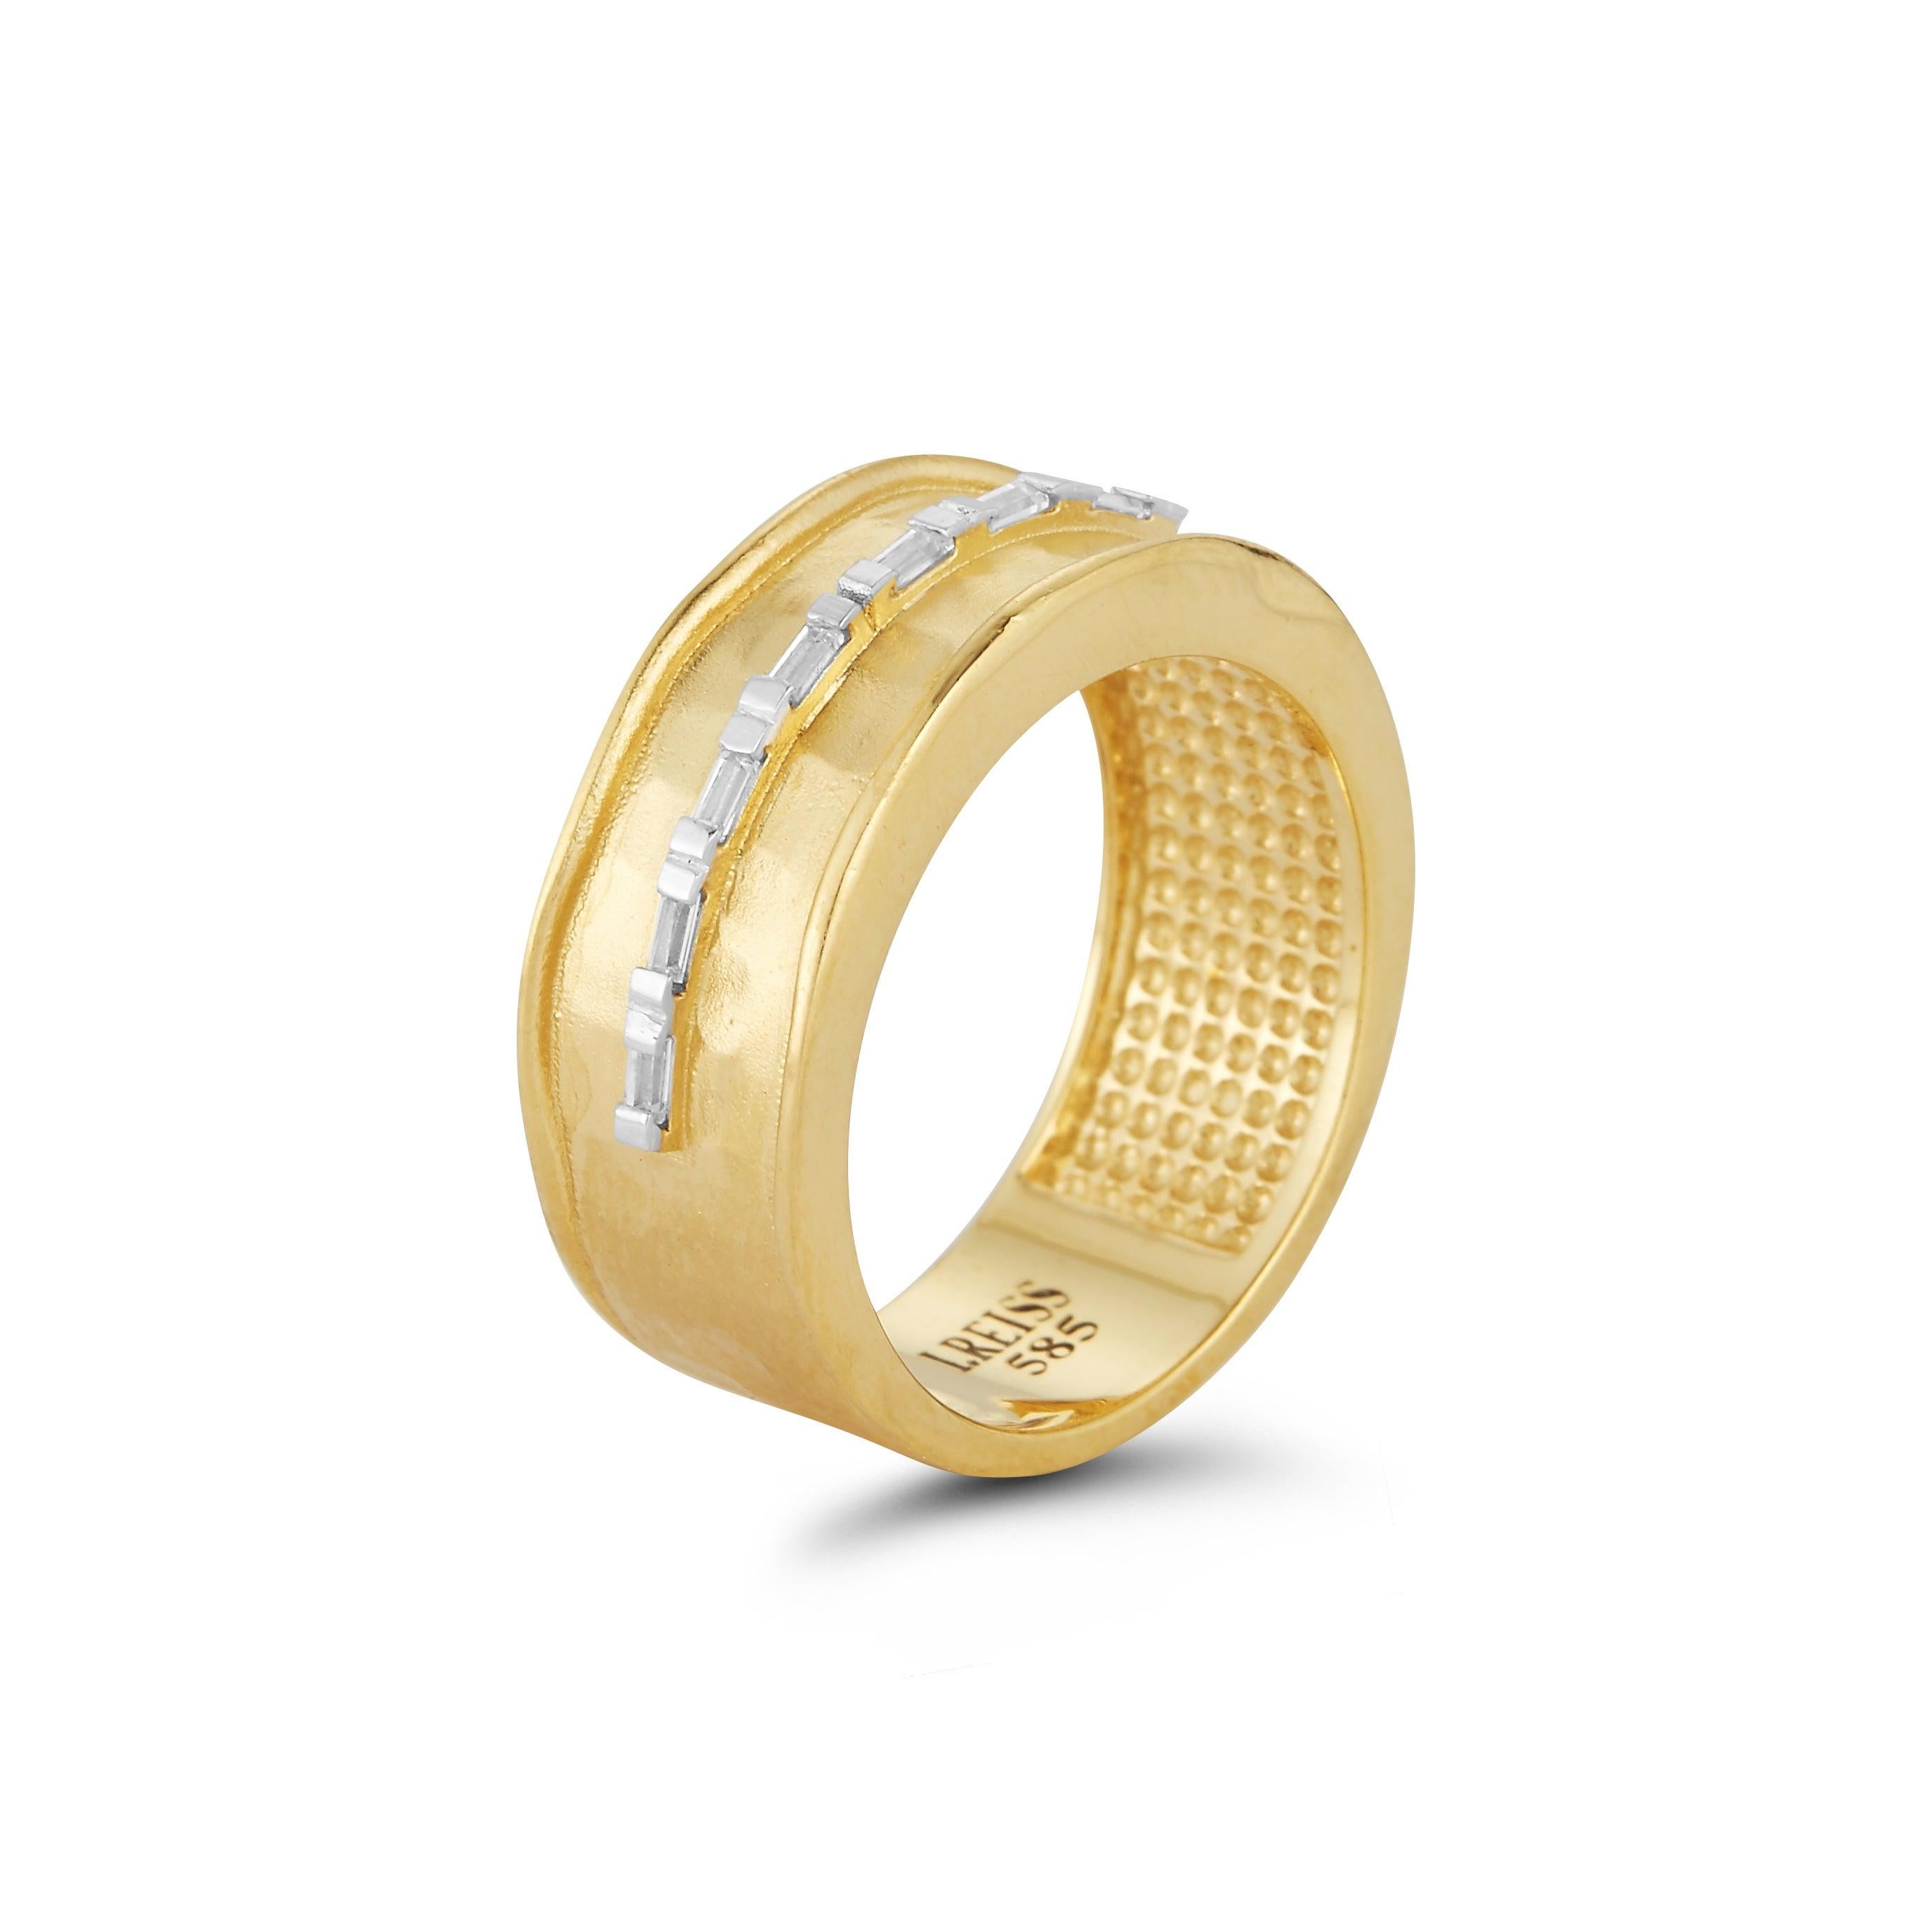 For Sale:  Handcrafted 14 Karat Yellow Gold Hammered Ring with Baguette Diamonds 3